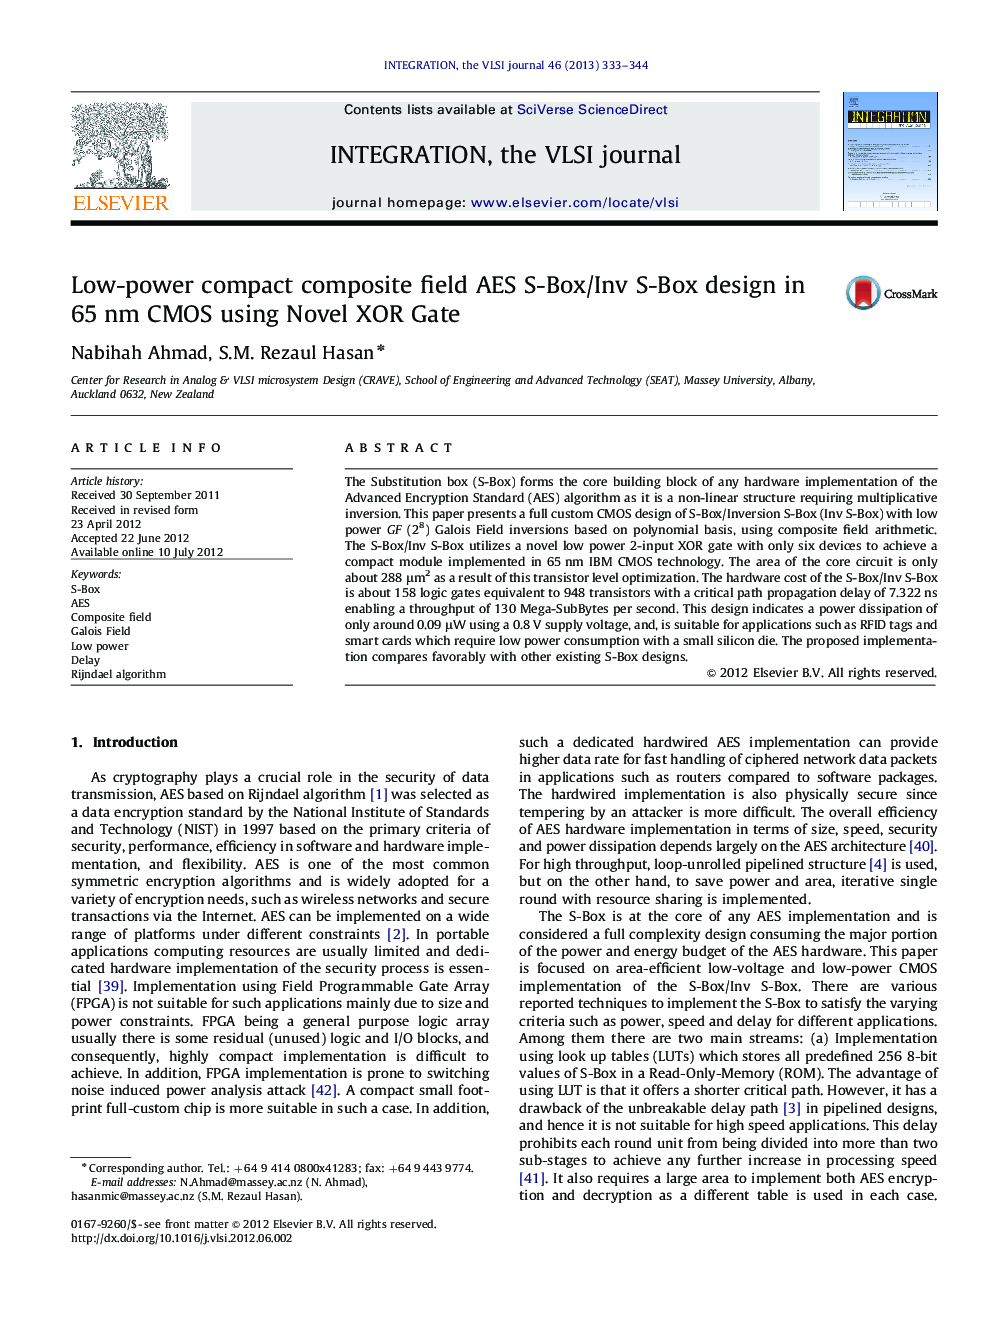 Low-power compact composite field AES S-Box/Inv S-Box design in 65 nm CMOS using Novel XOR Gate